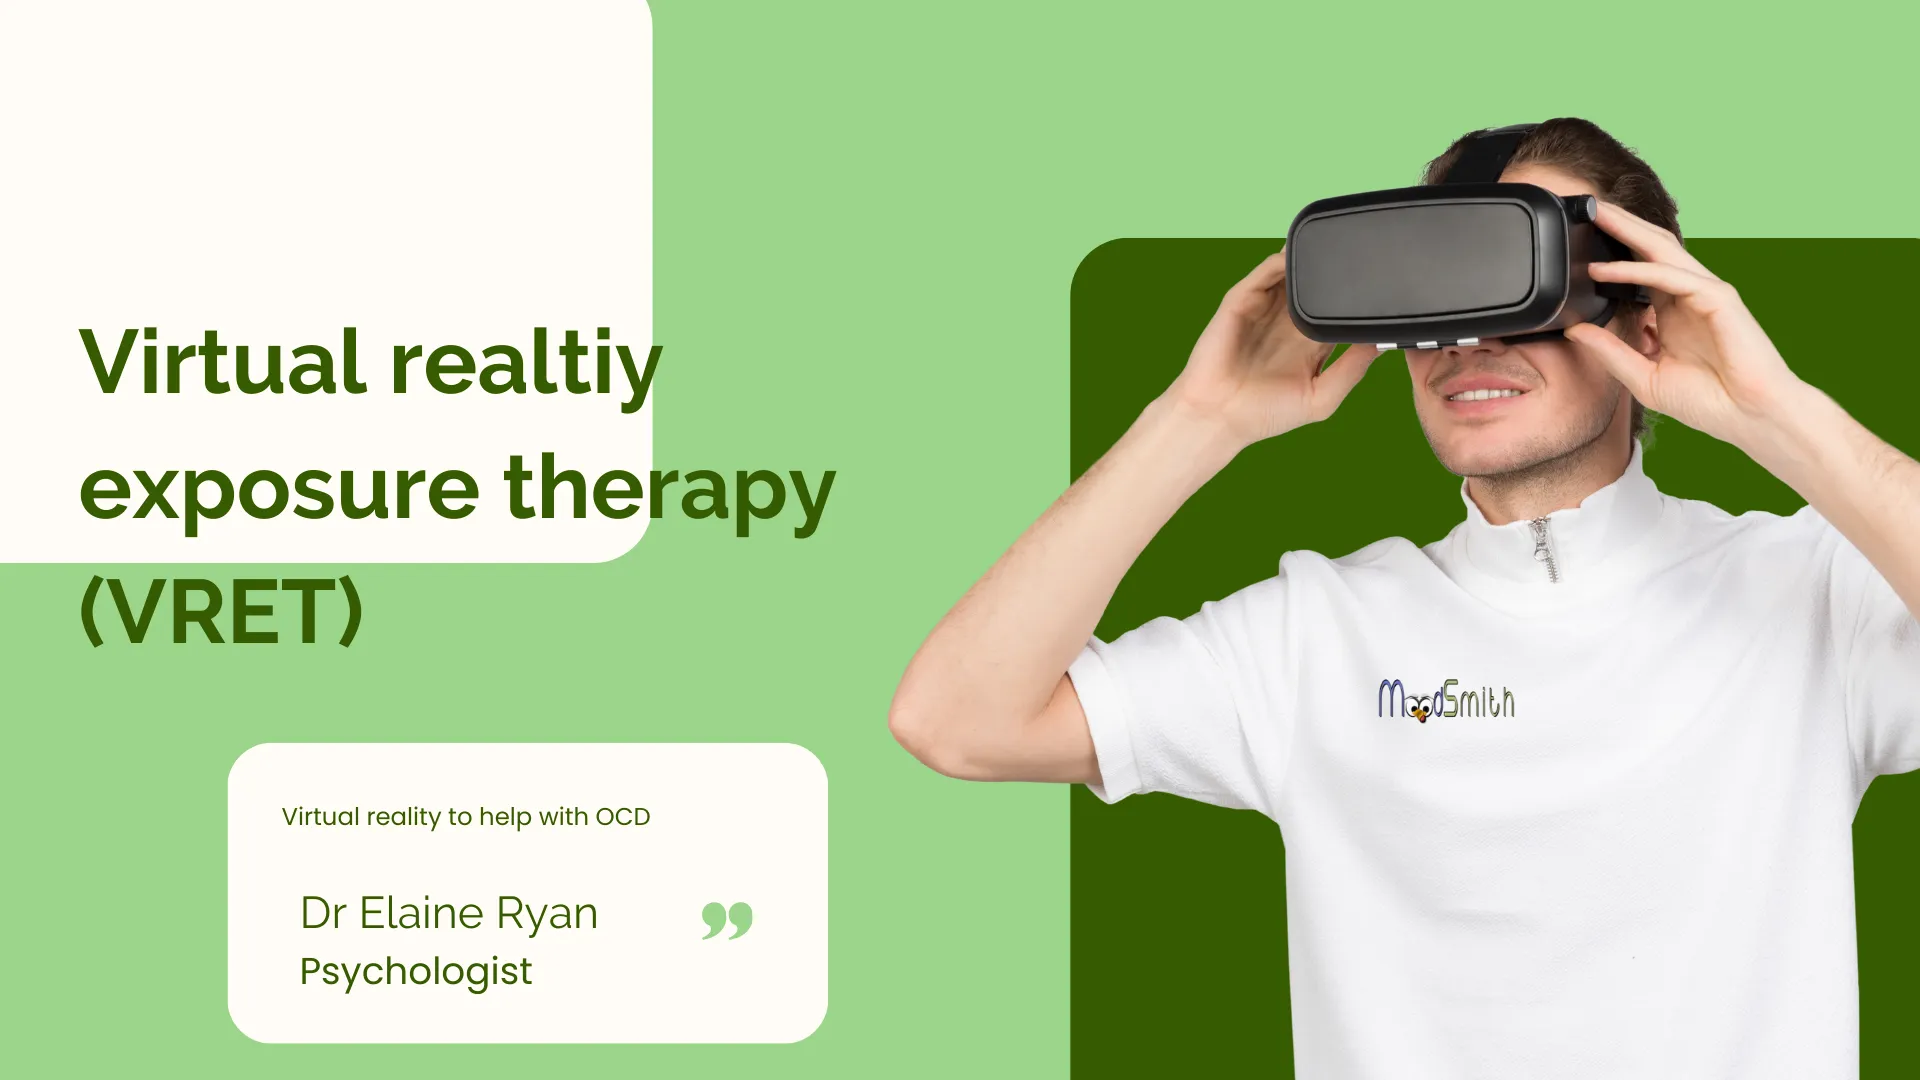 image of man with VR headset wearing shirt with MoodSmith logo and words virtual reality for ocd